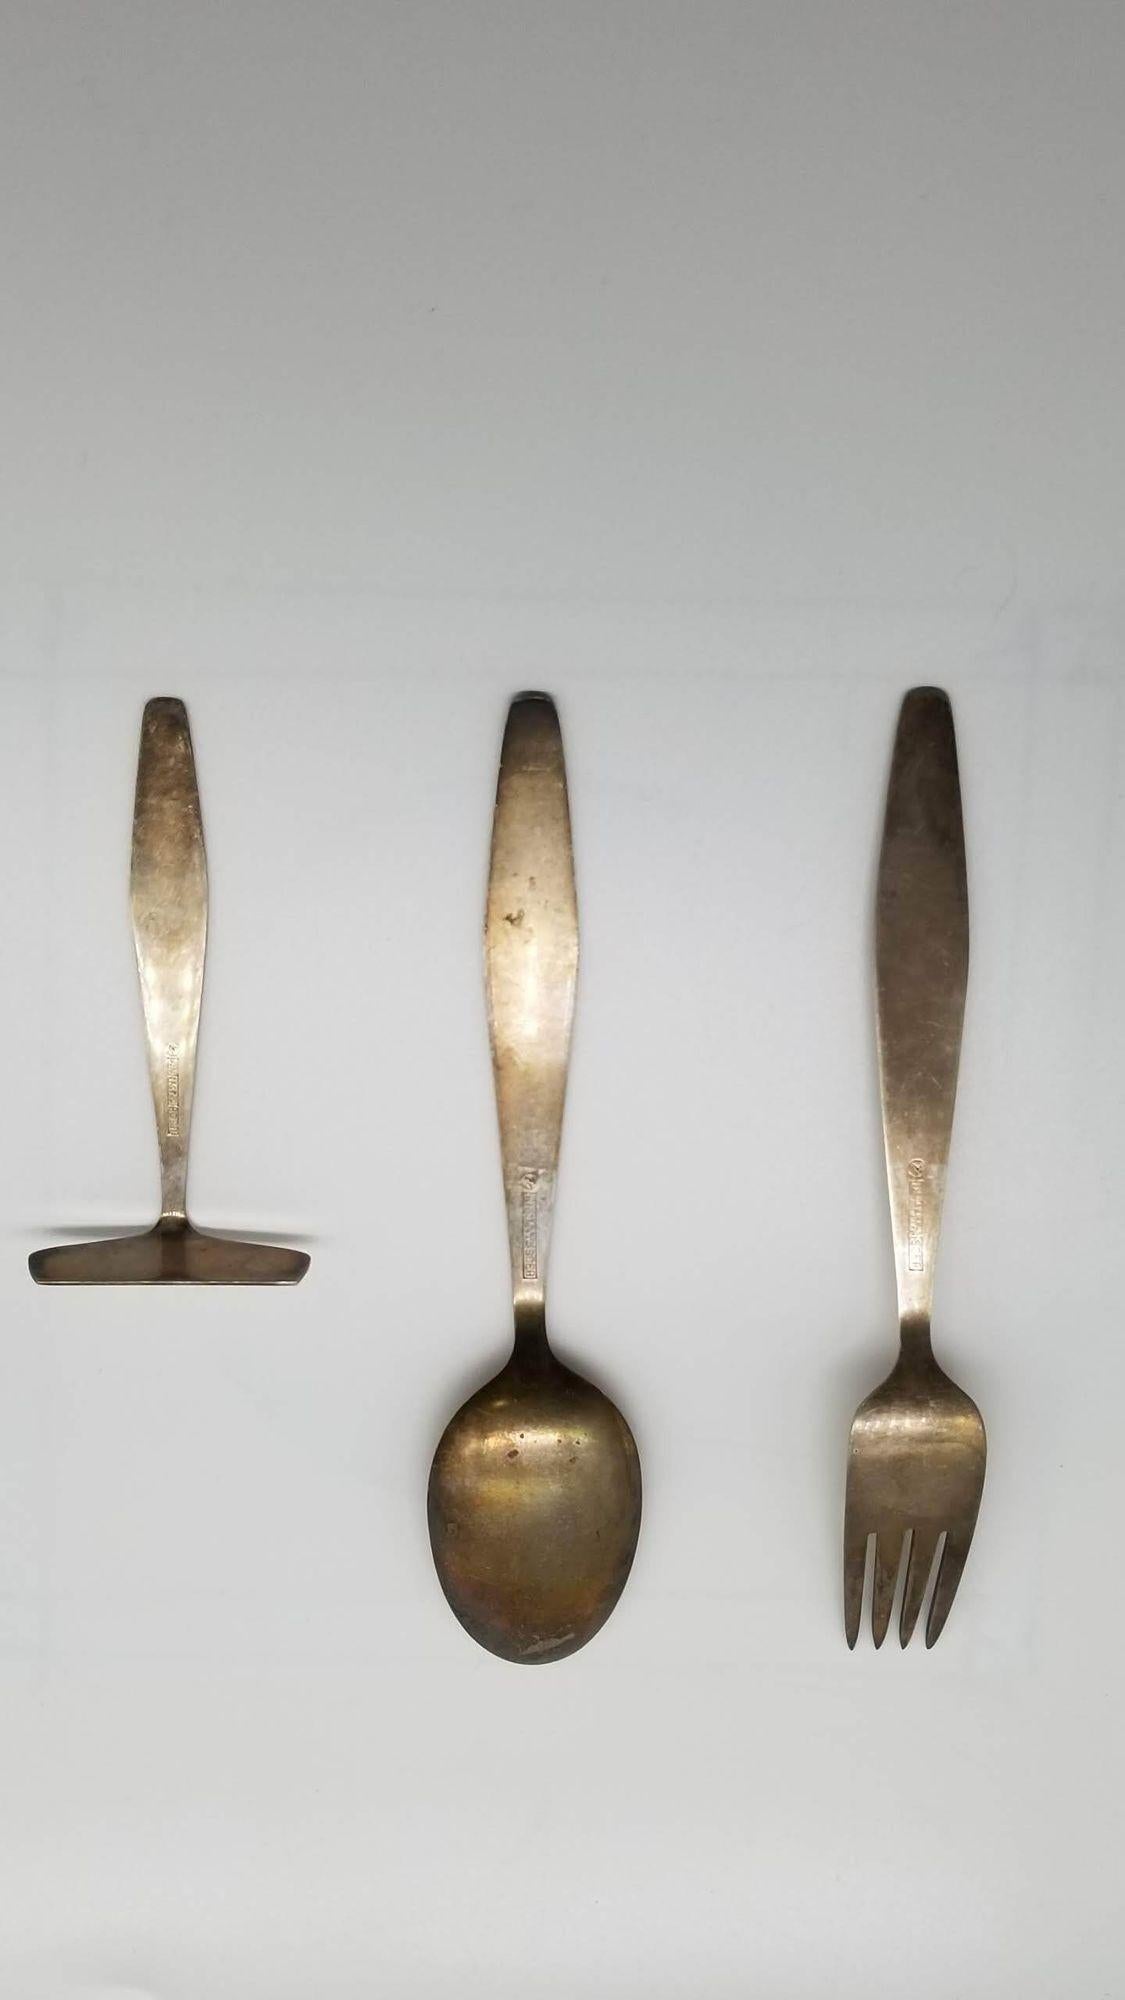 Antique Kids Set of 3, Silverware 830S by Mylius, Norway -1900s In Excellent Condition For Sale In Van Nuys, CA